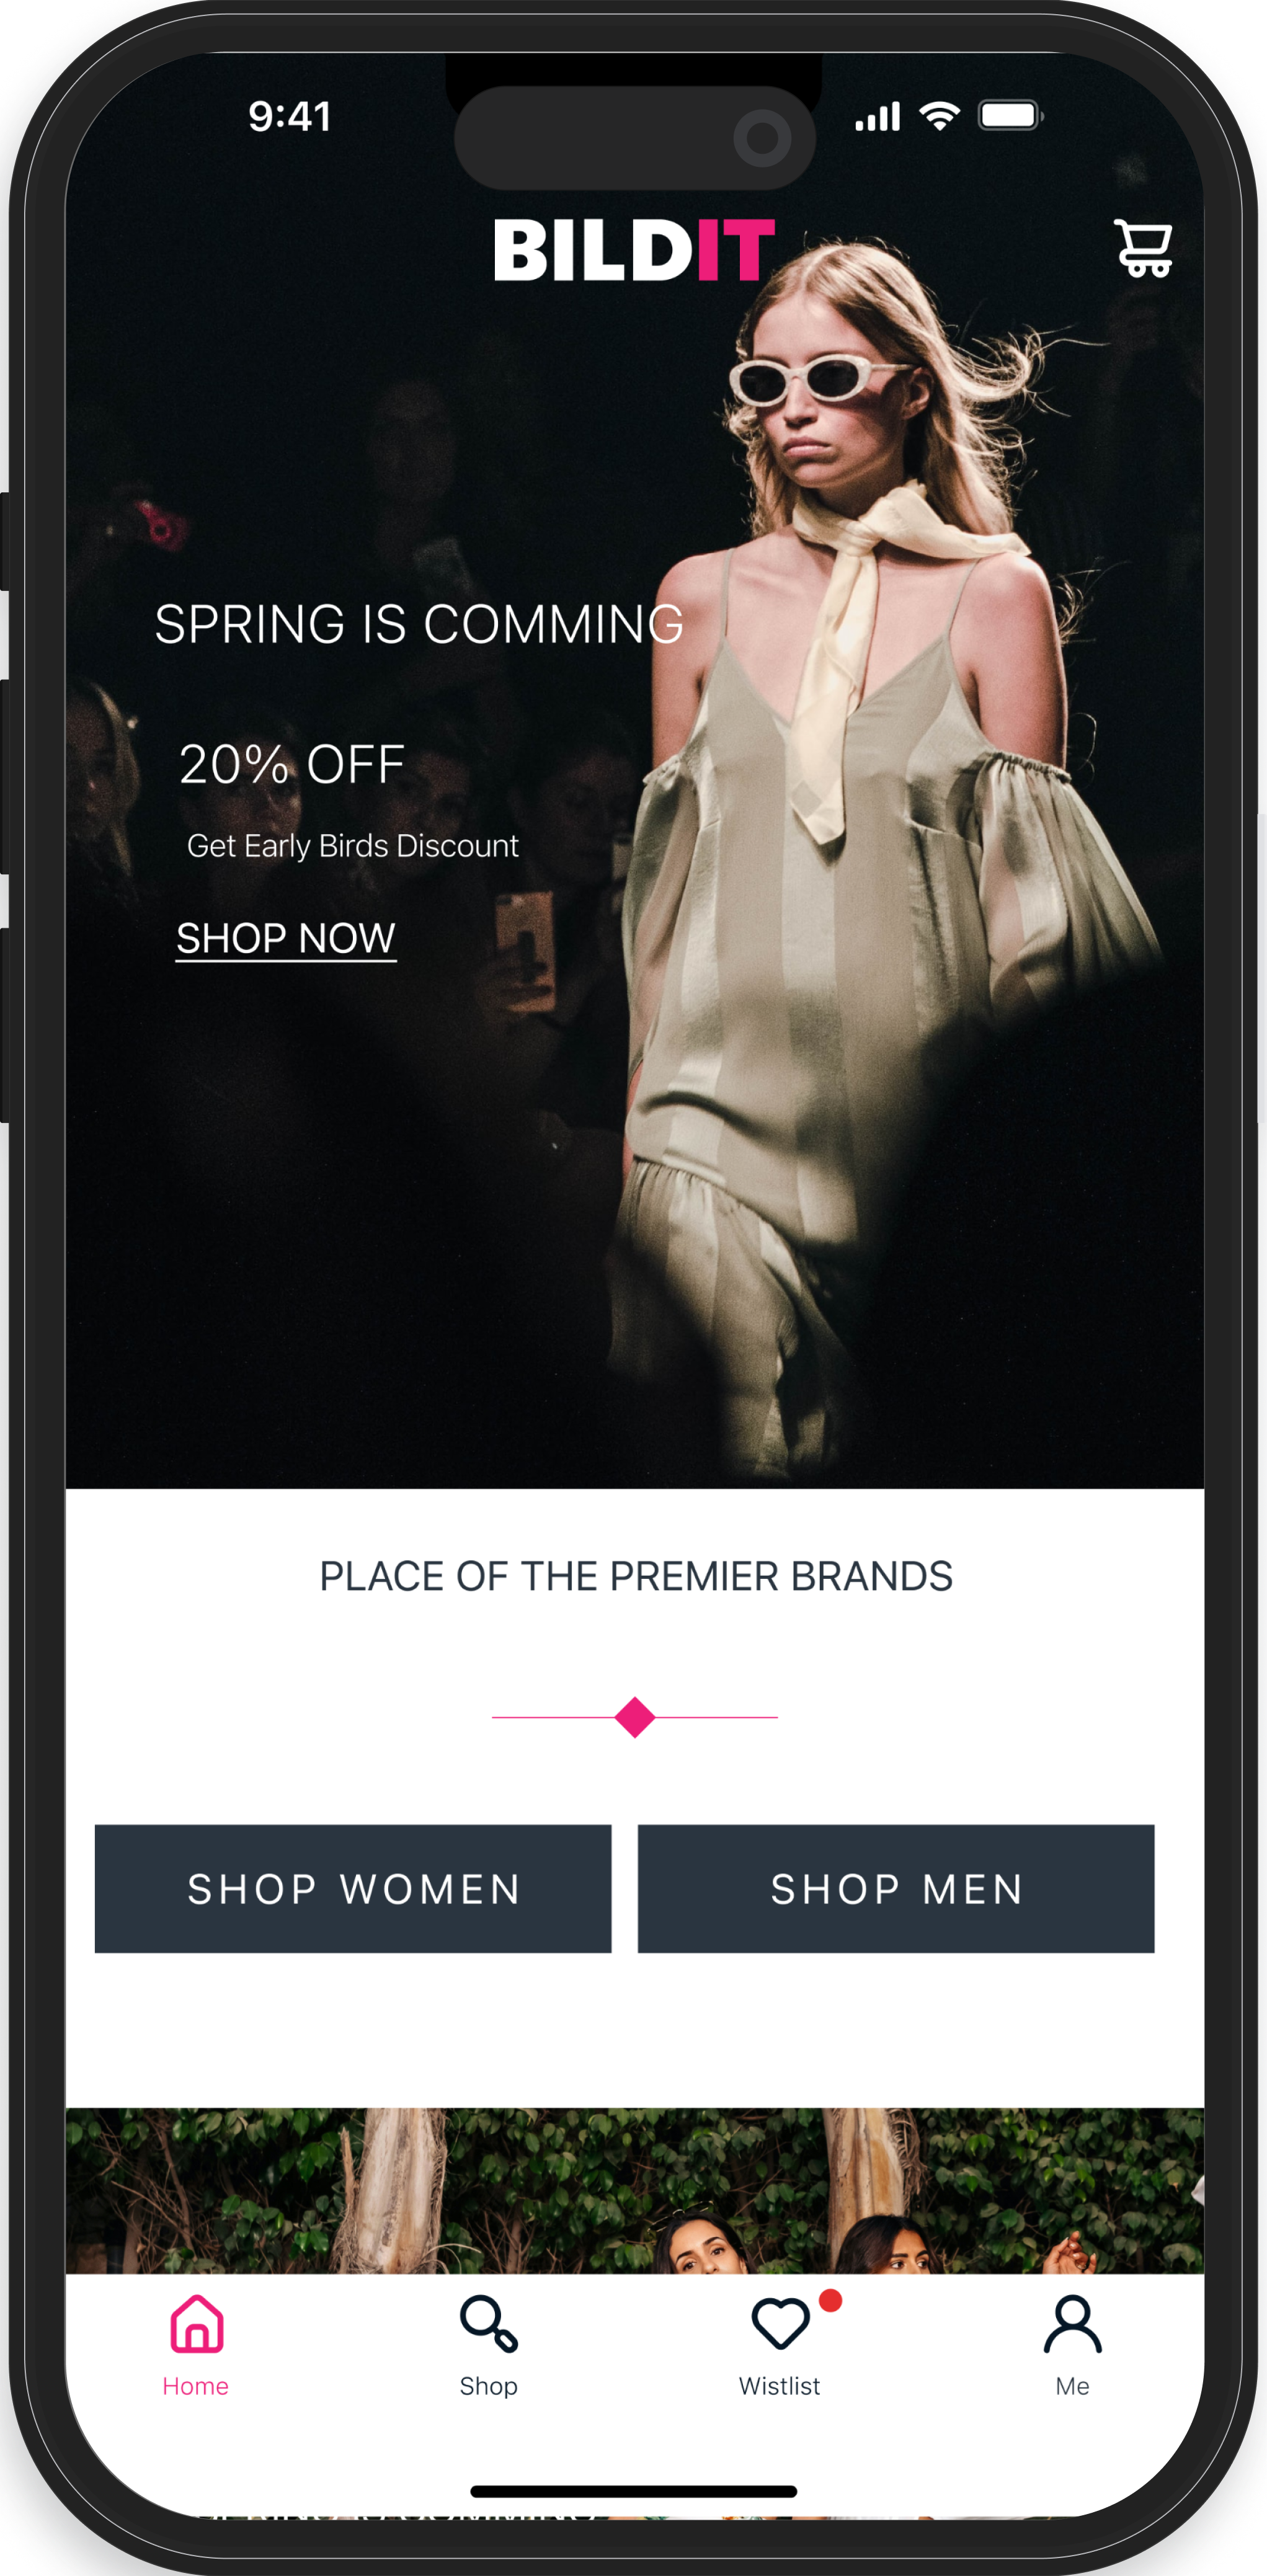 The image displays a smartphone screen promoting a fashion sale. At the top is a header with the brand name 'BILDIT', followed by a fashion model on a runway and text announcing 'SPRING IS COMING 20% OFF'. Below the promotional message, there are two buttons 'SHOP WOMEN' and 'SHOP MEN', with a navigation bar at the bottom featuring home, shop, wishlist, and profile icons.